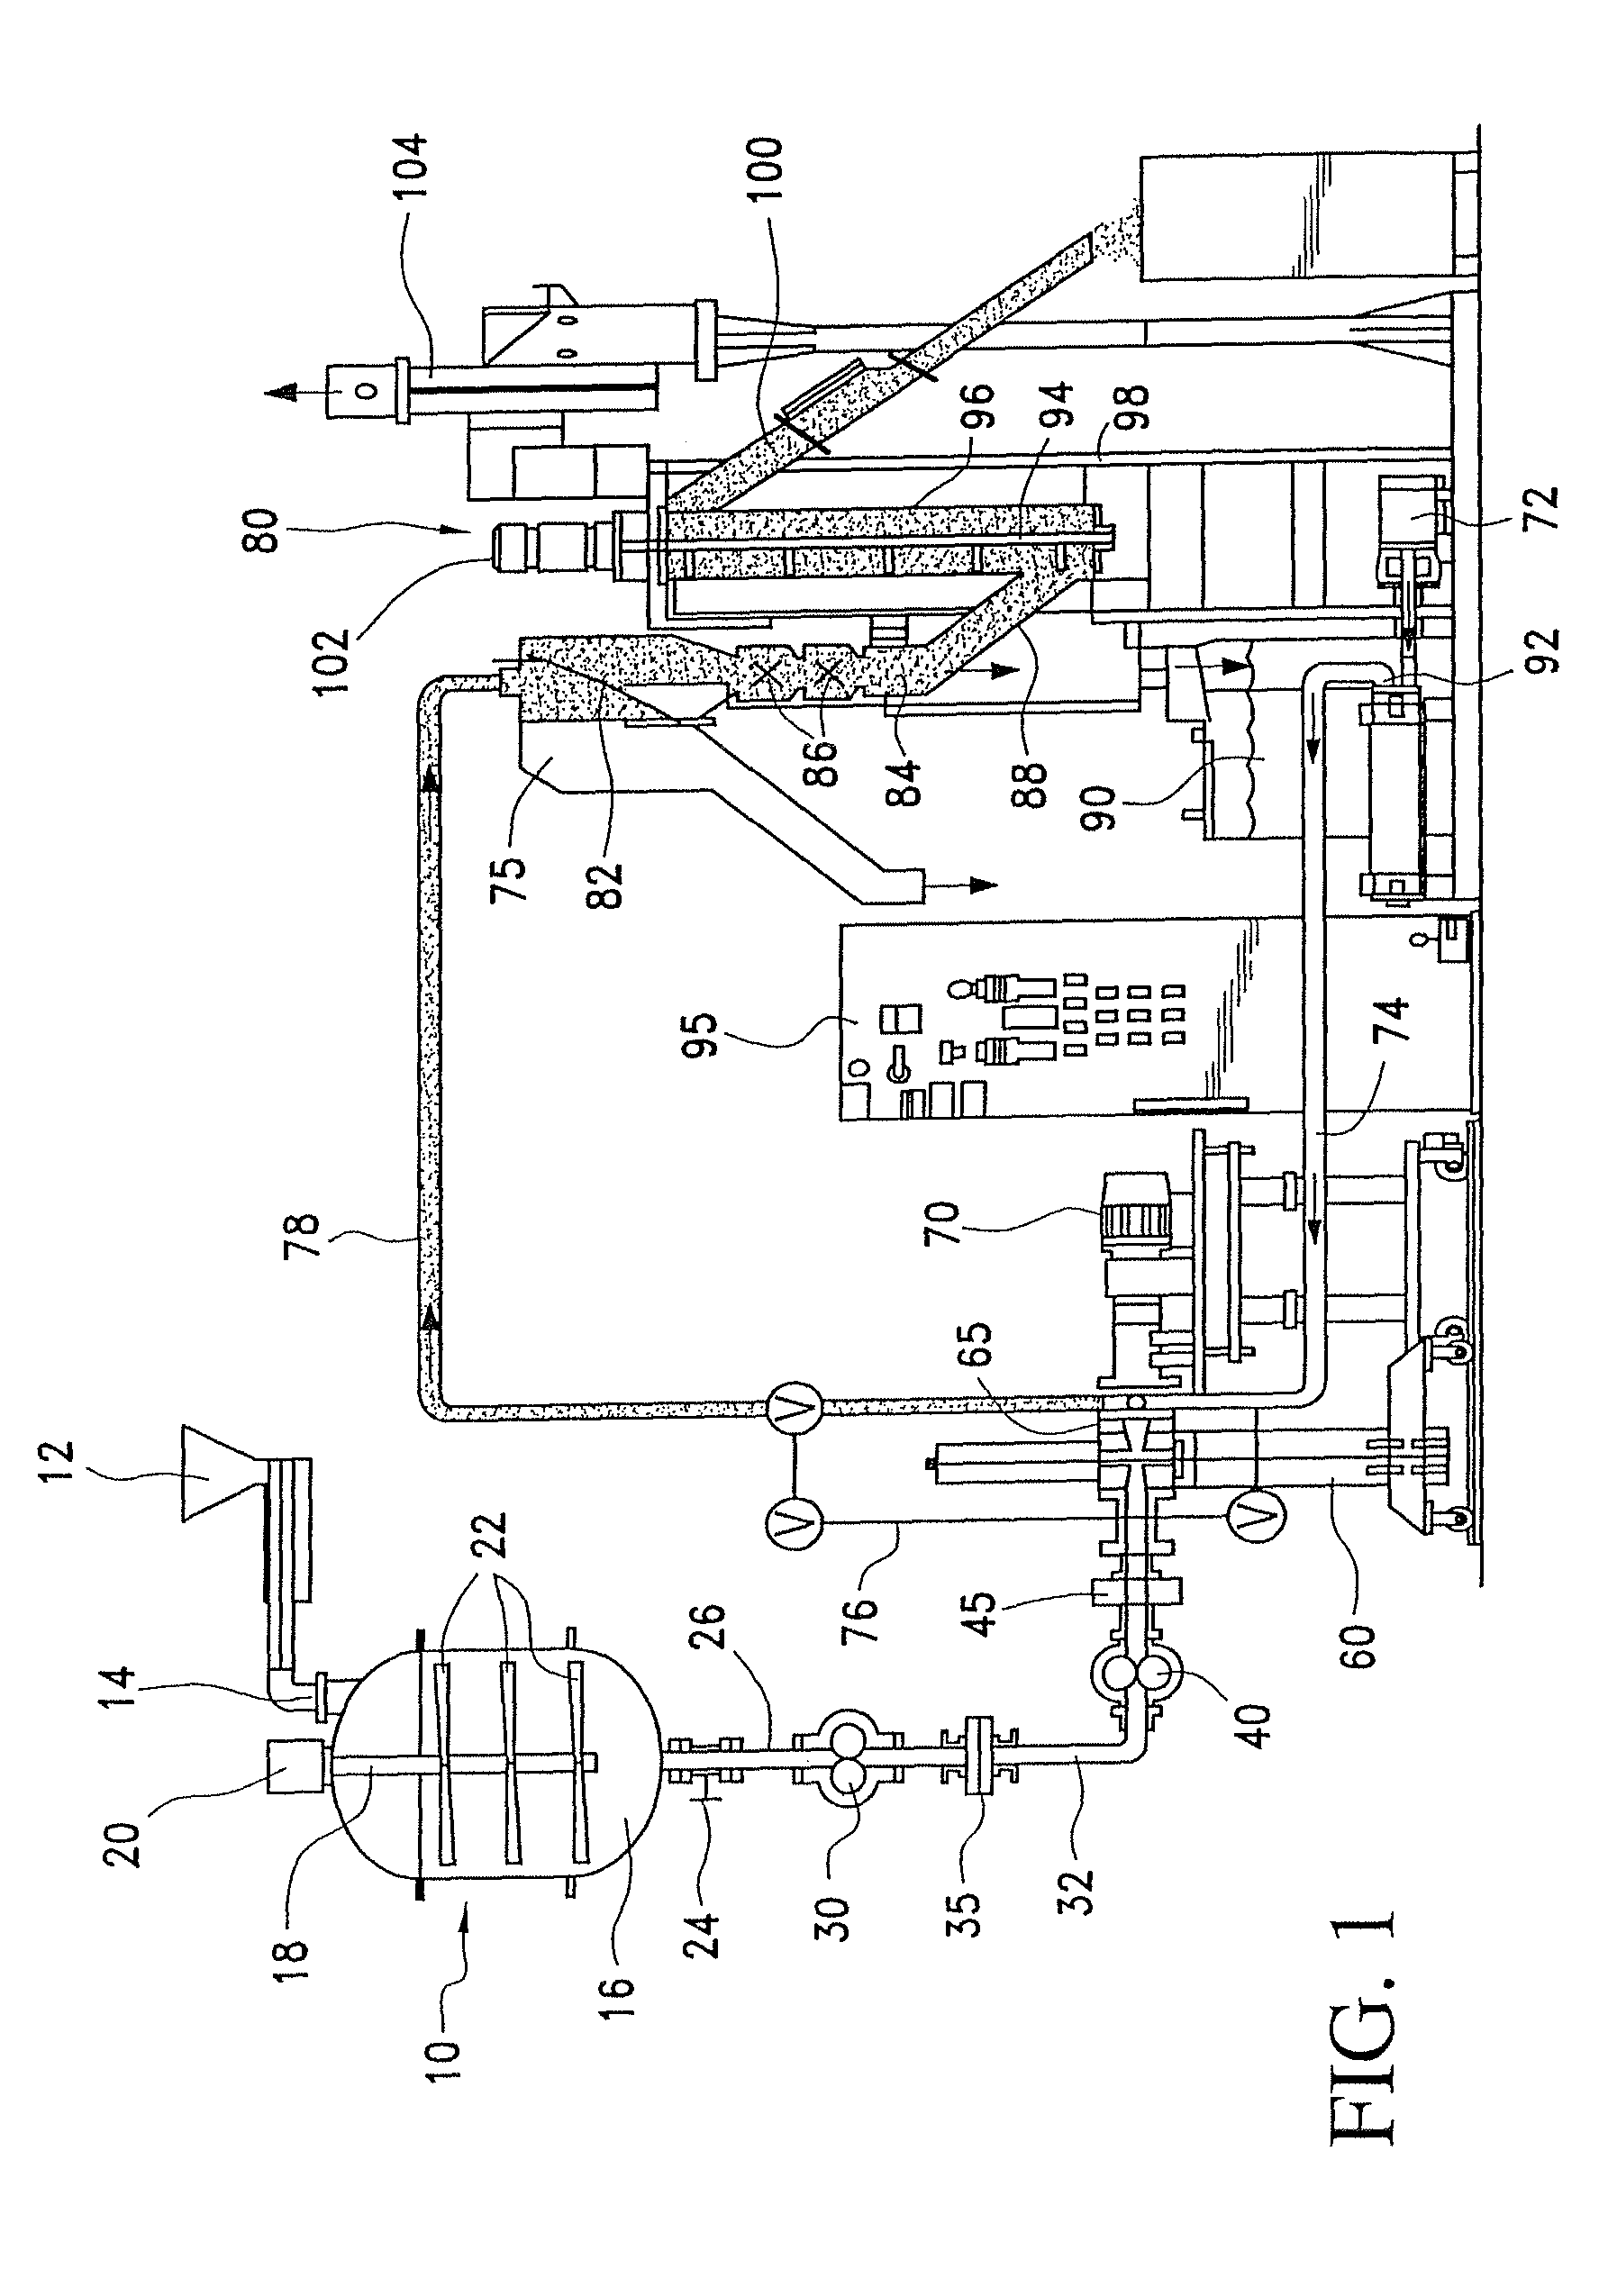 Apparatus and method for controlled pelletization processing